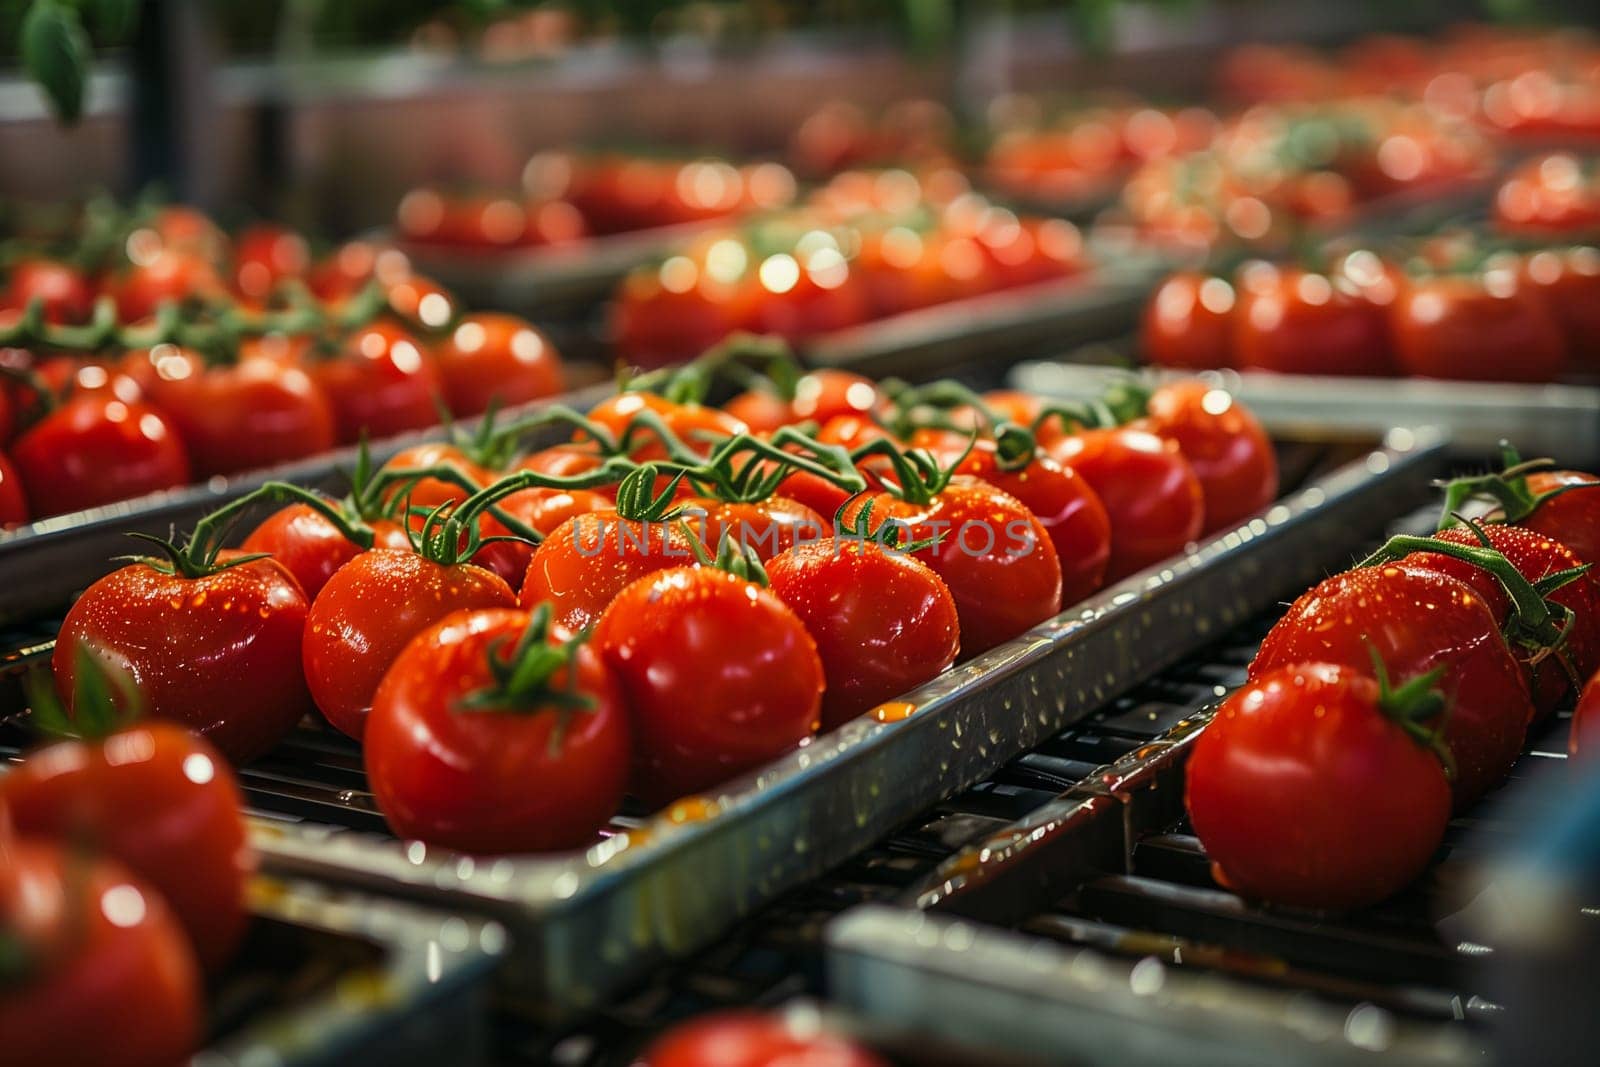 Numerous trays filled with ripe red tomatoes lined up on a conveyor belt, ready for sorting and packaging in a commercial farming operation.